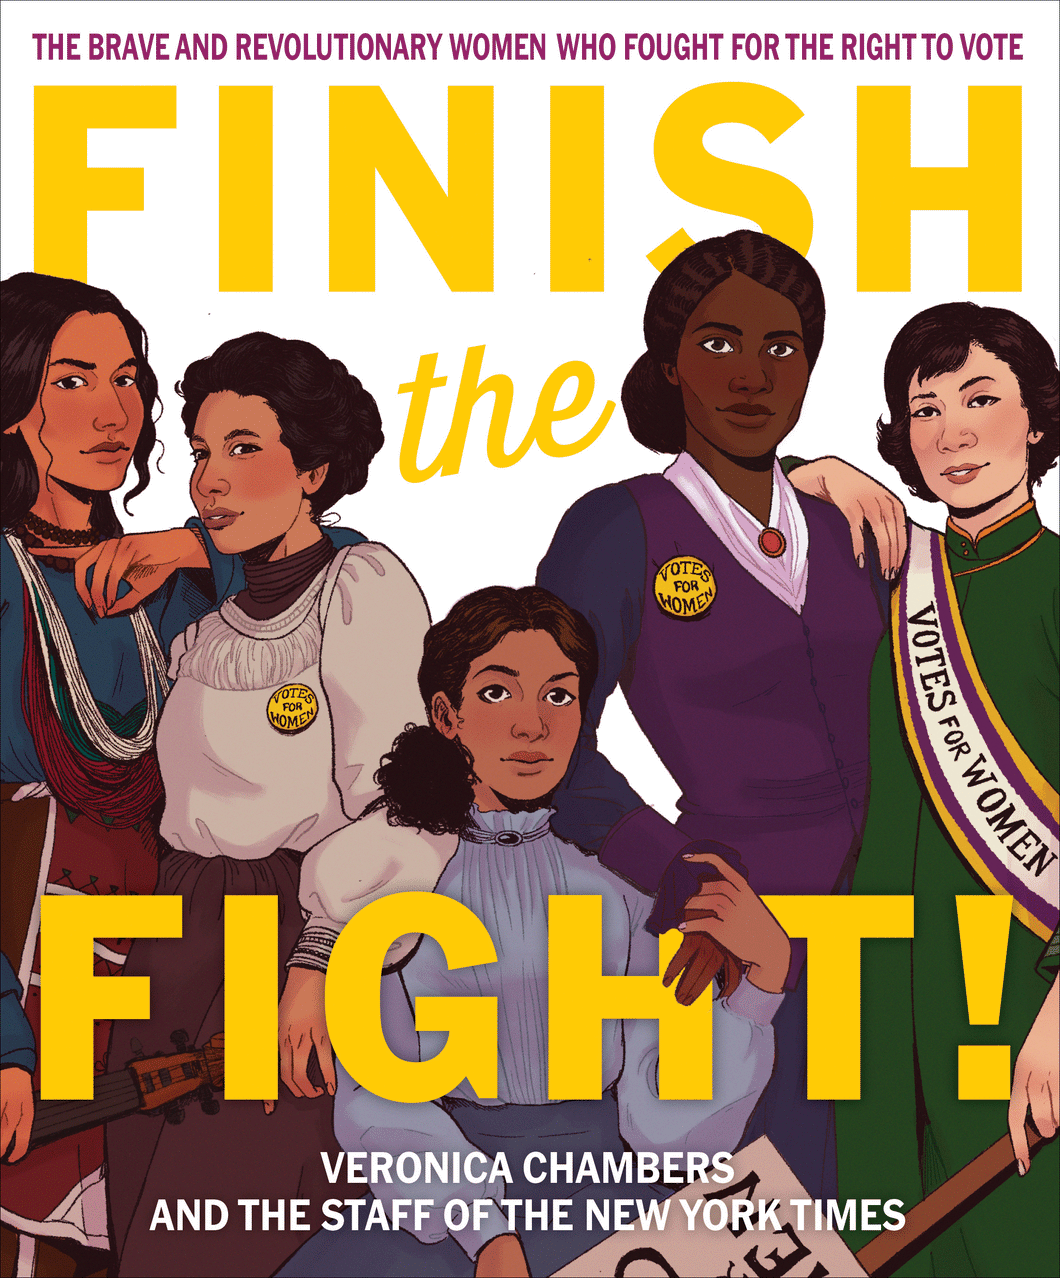 Finish the Fight: The Brave and Revolutionary Women Who Fought for the Right to Vote by Veronica Chambers